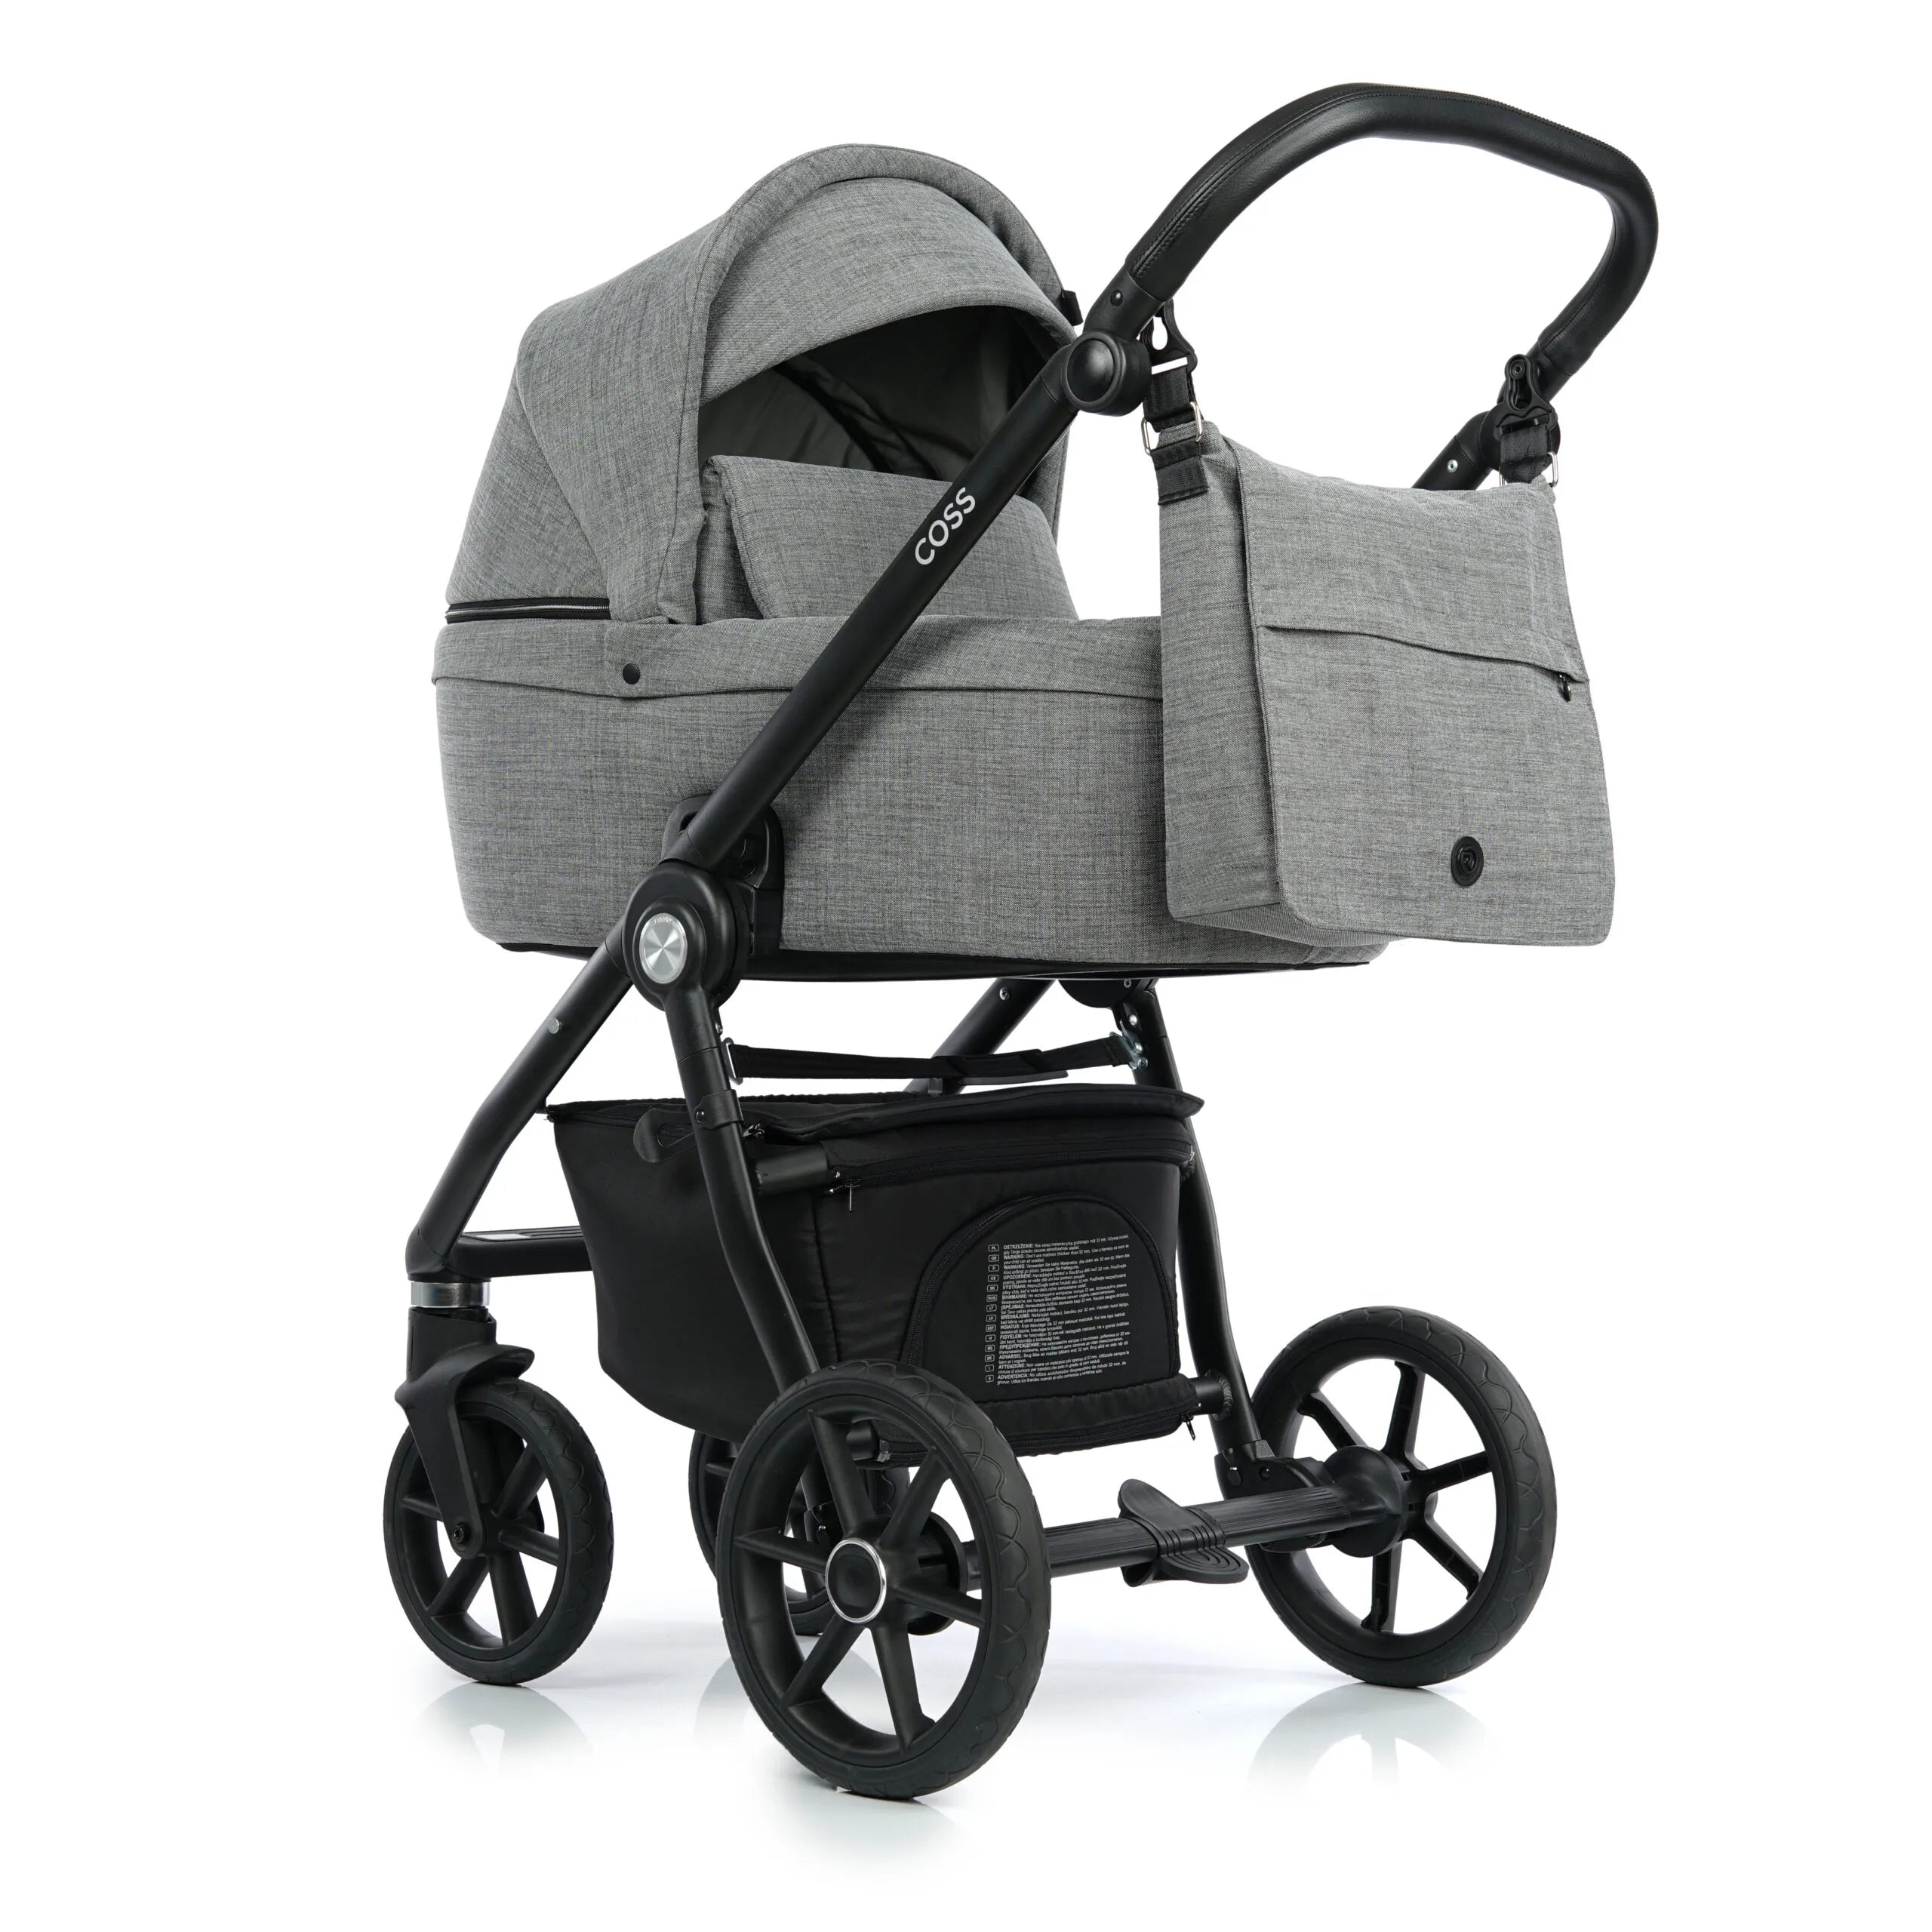 Roan COSS baby stroller carry cot and stroller, color Titanium